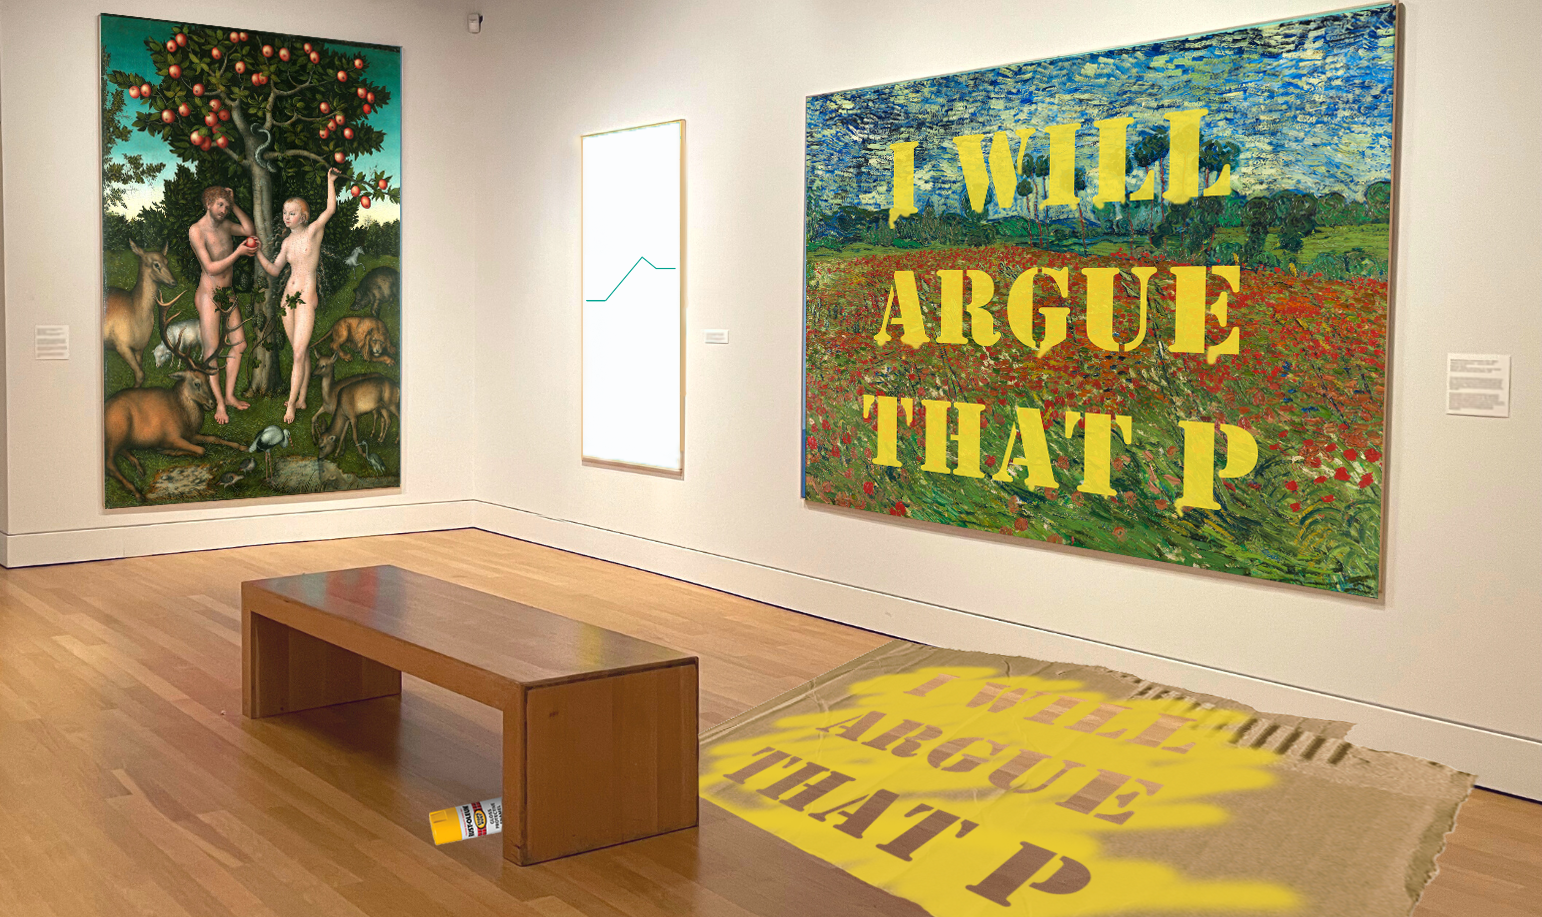 Art gallery displaying a painting of Adam and Eve, a painting of Freytag's Triangle, and a vandalized painting of Van Gogh's field of poppies, with the words "I will argue that P" spraypainted onto it with a stencil